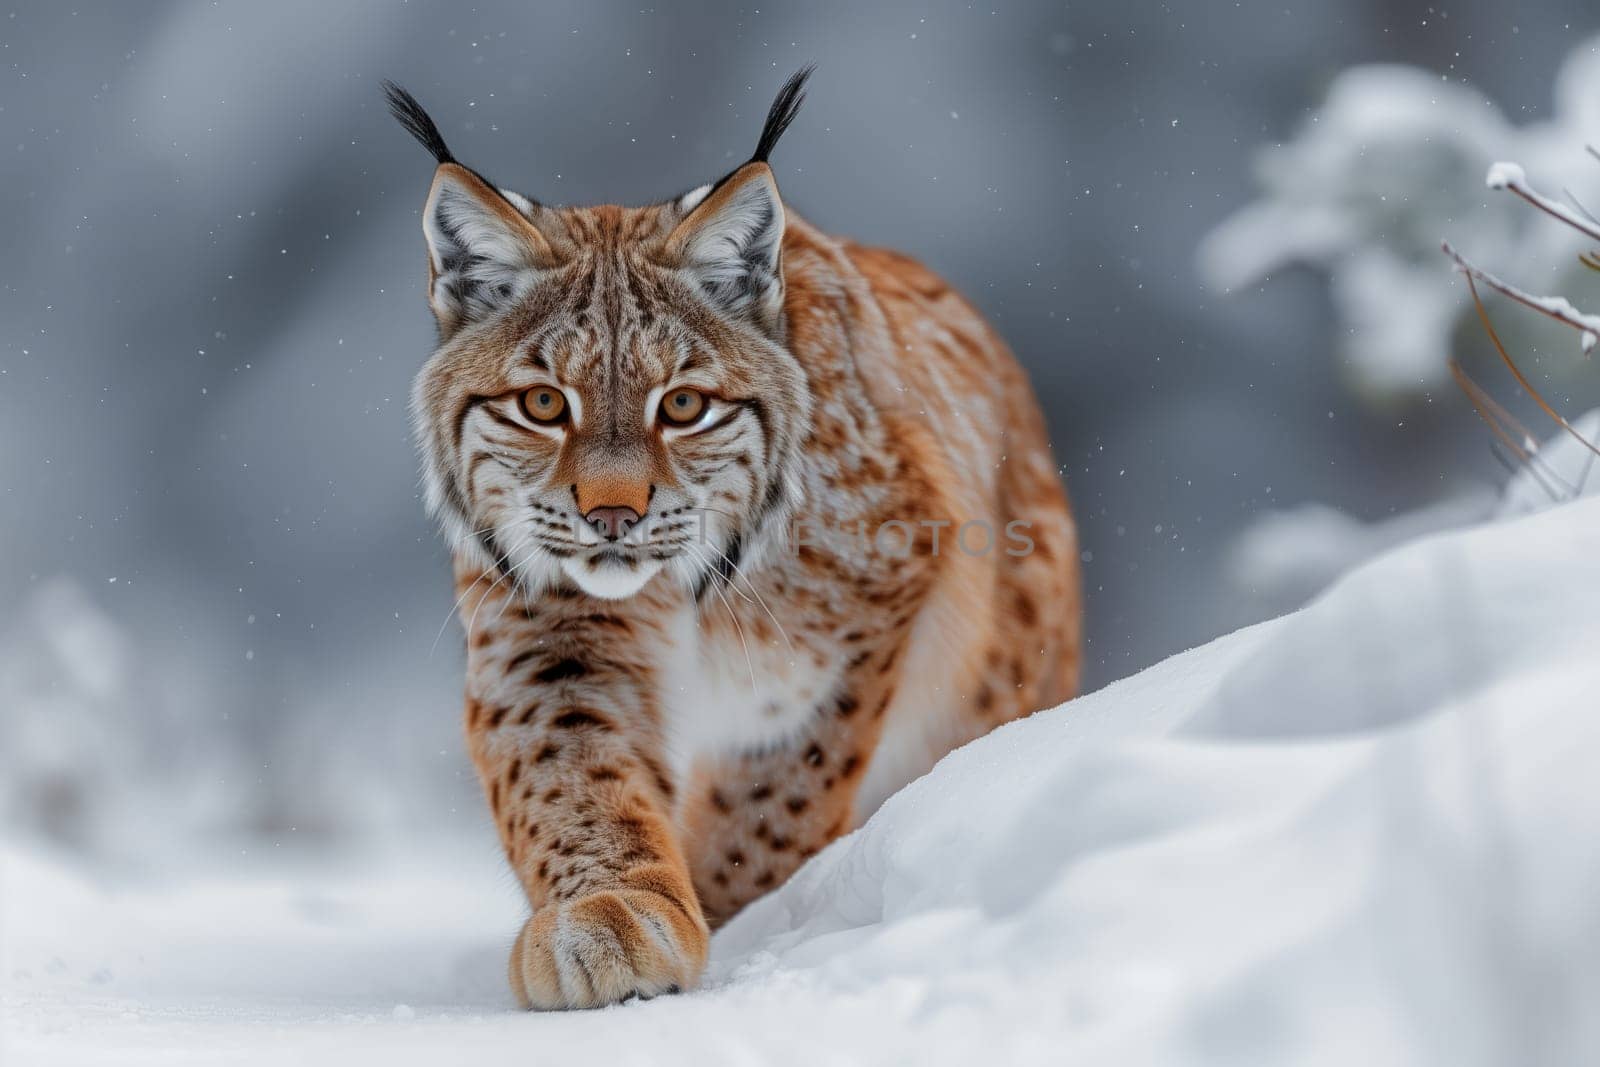 A carnivorous Felidae, the Lynx, with its whiskers and fawn coat, is walking through the snow and gazing at the camera. A terrestrial animal belonging to the family of small to mediumsized cats